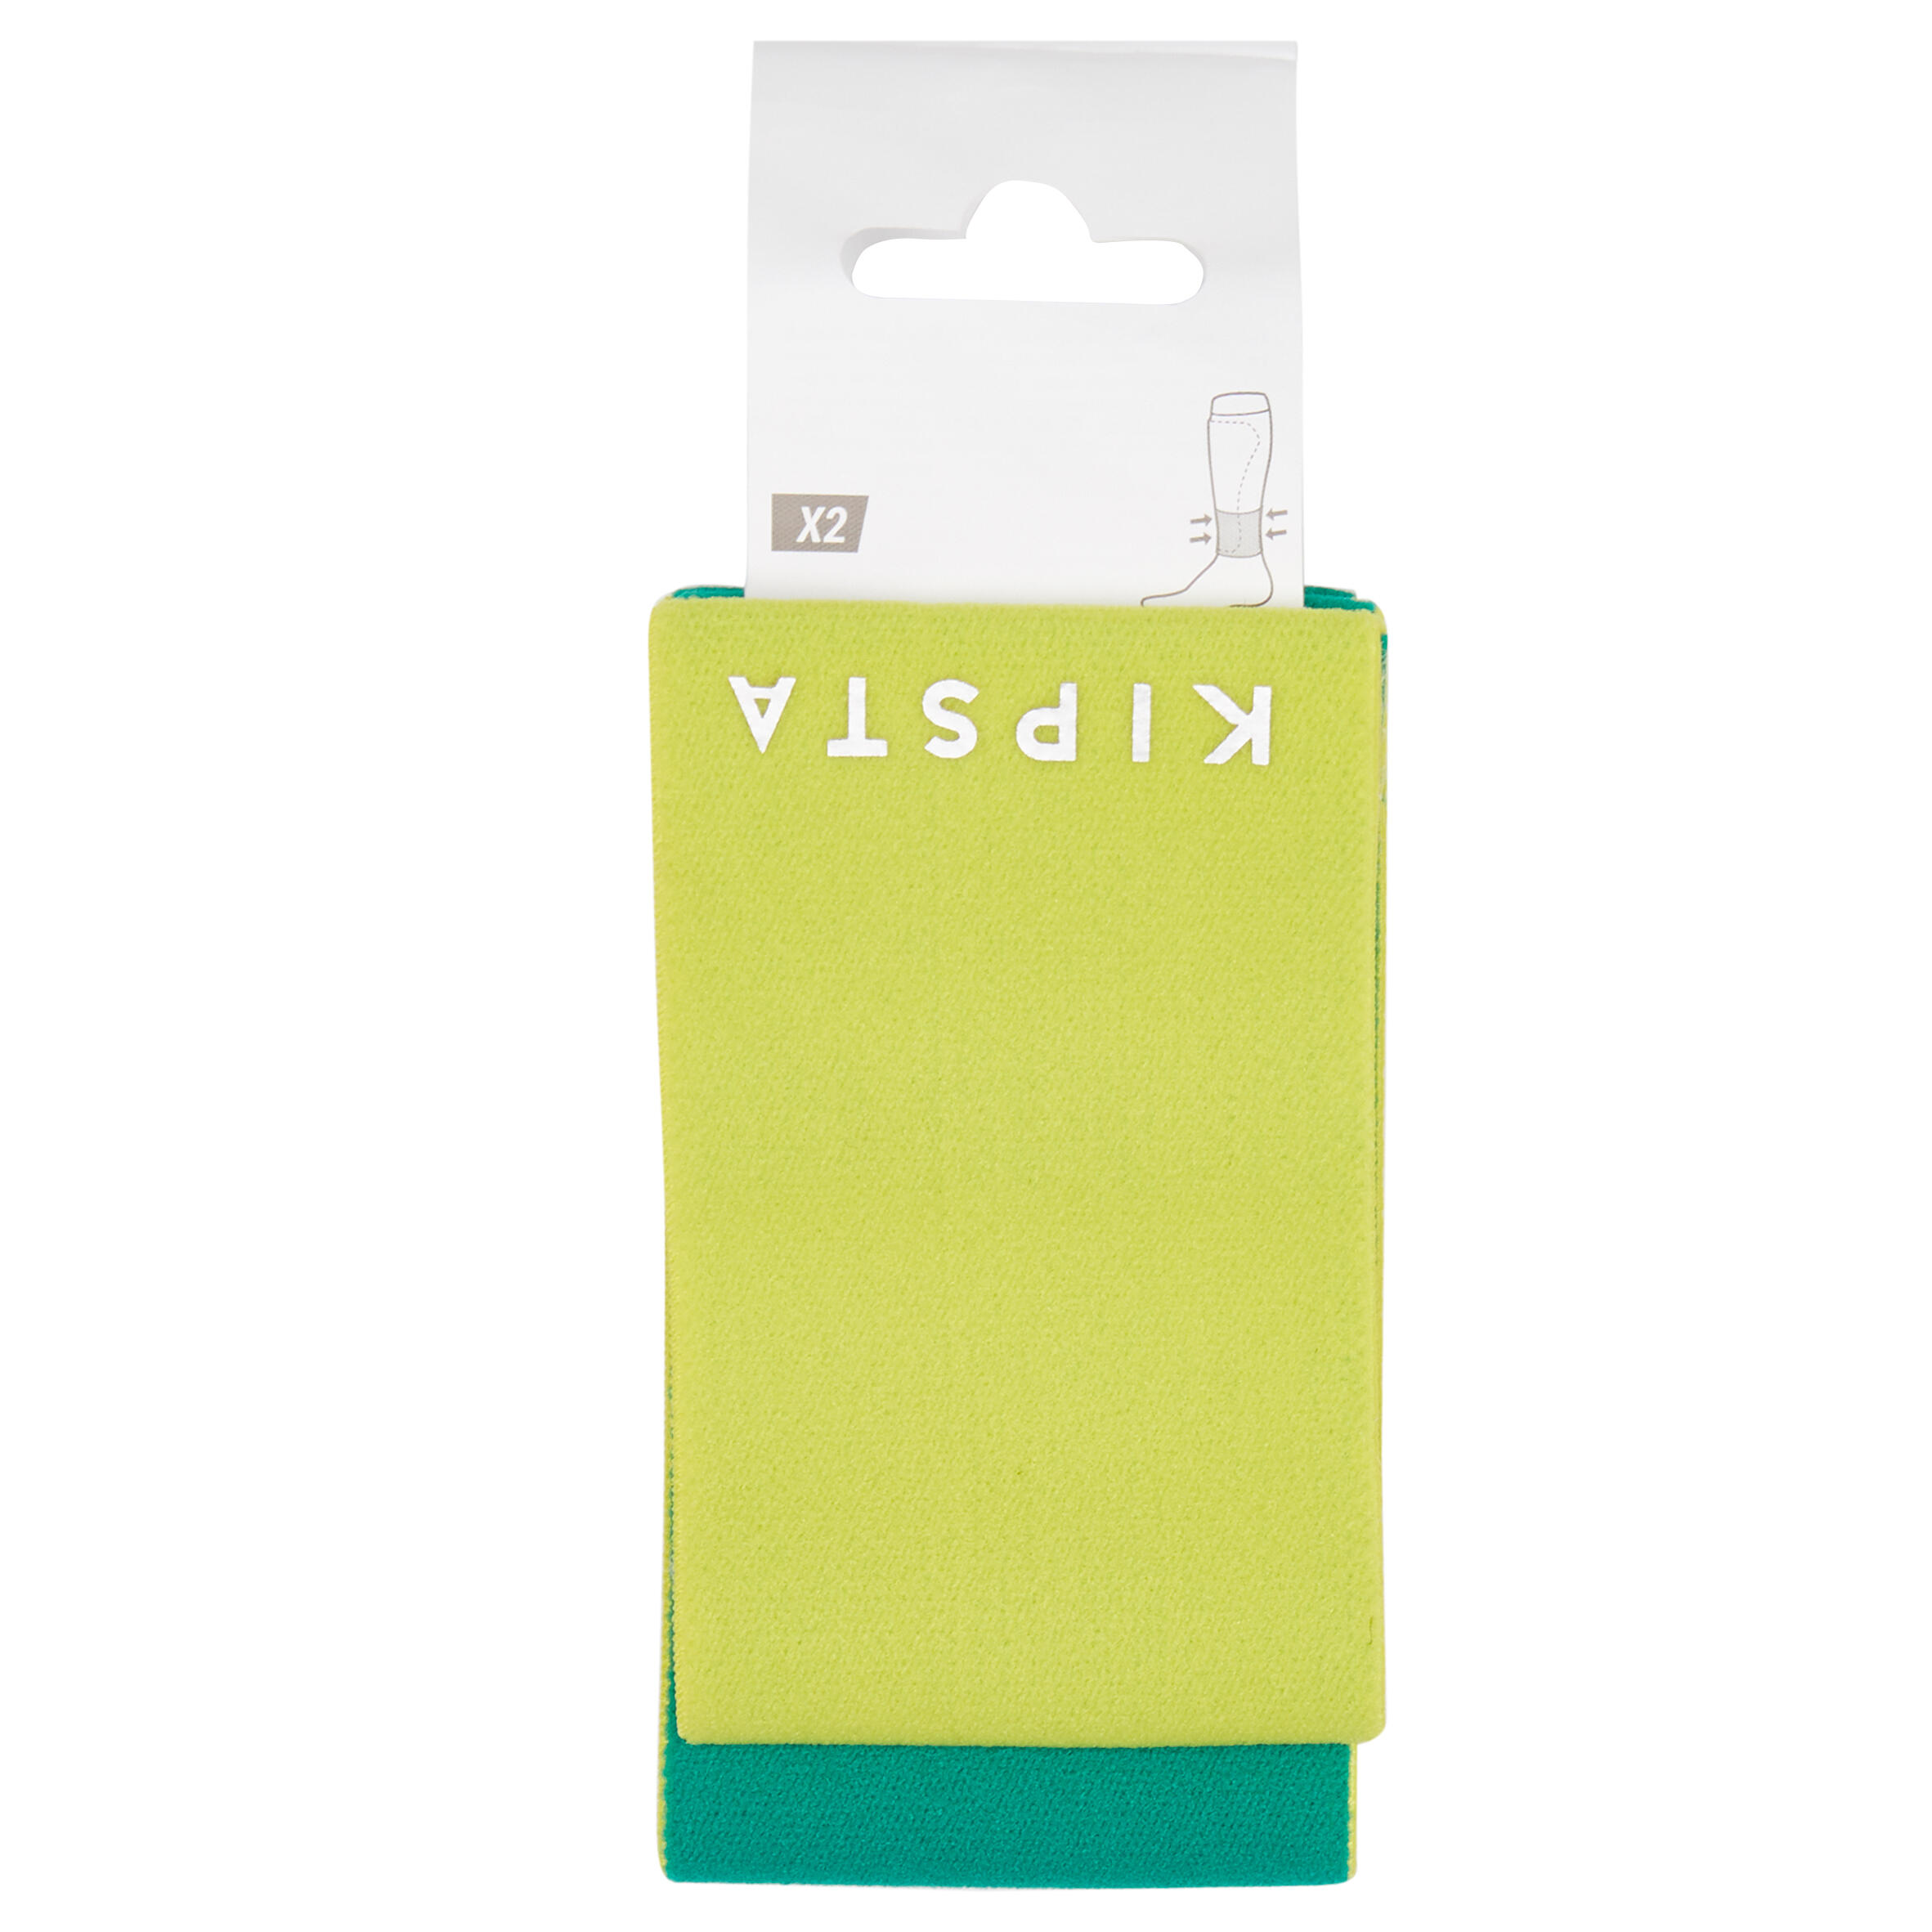 Reversible Support Strap - Yellow or Green 2/4